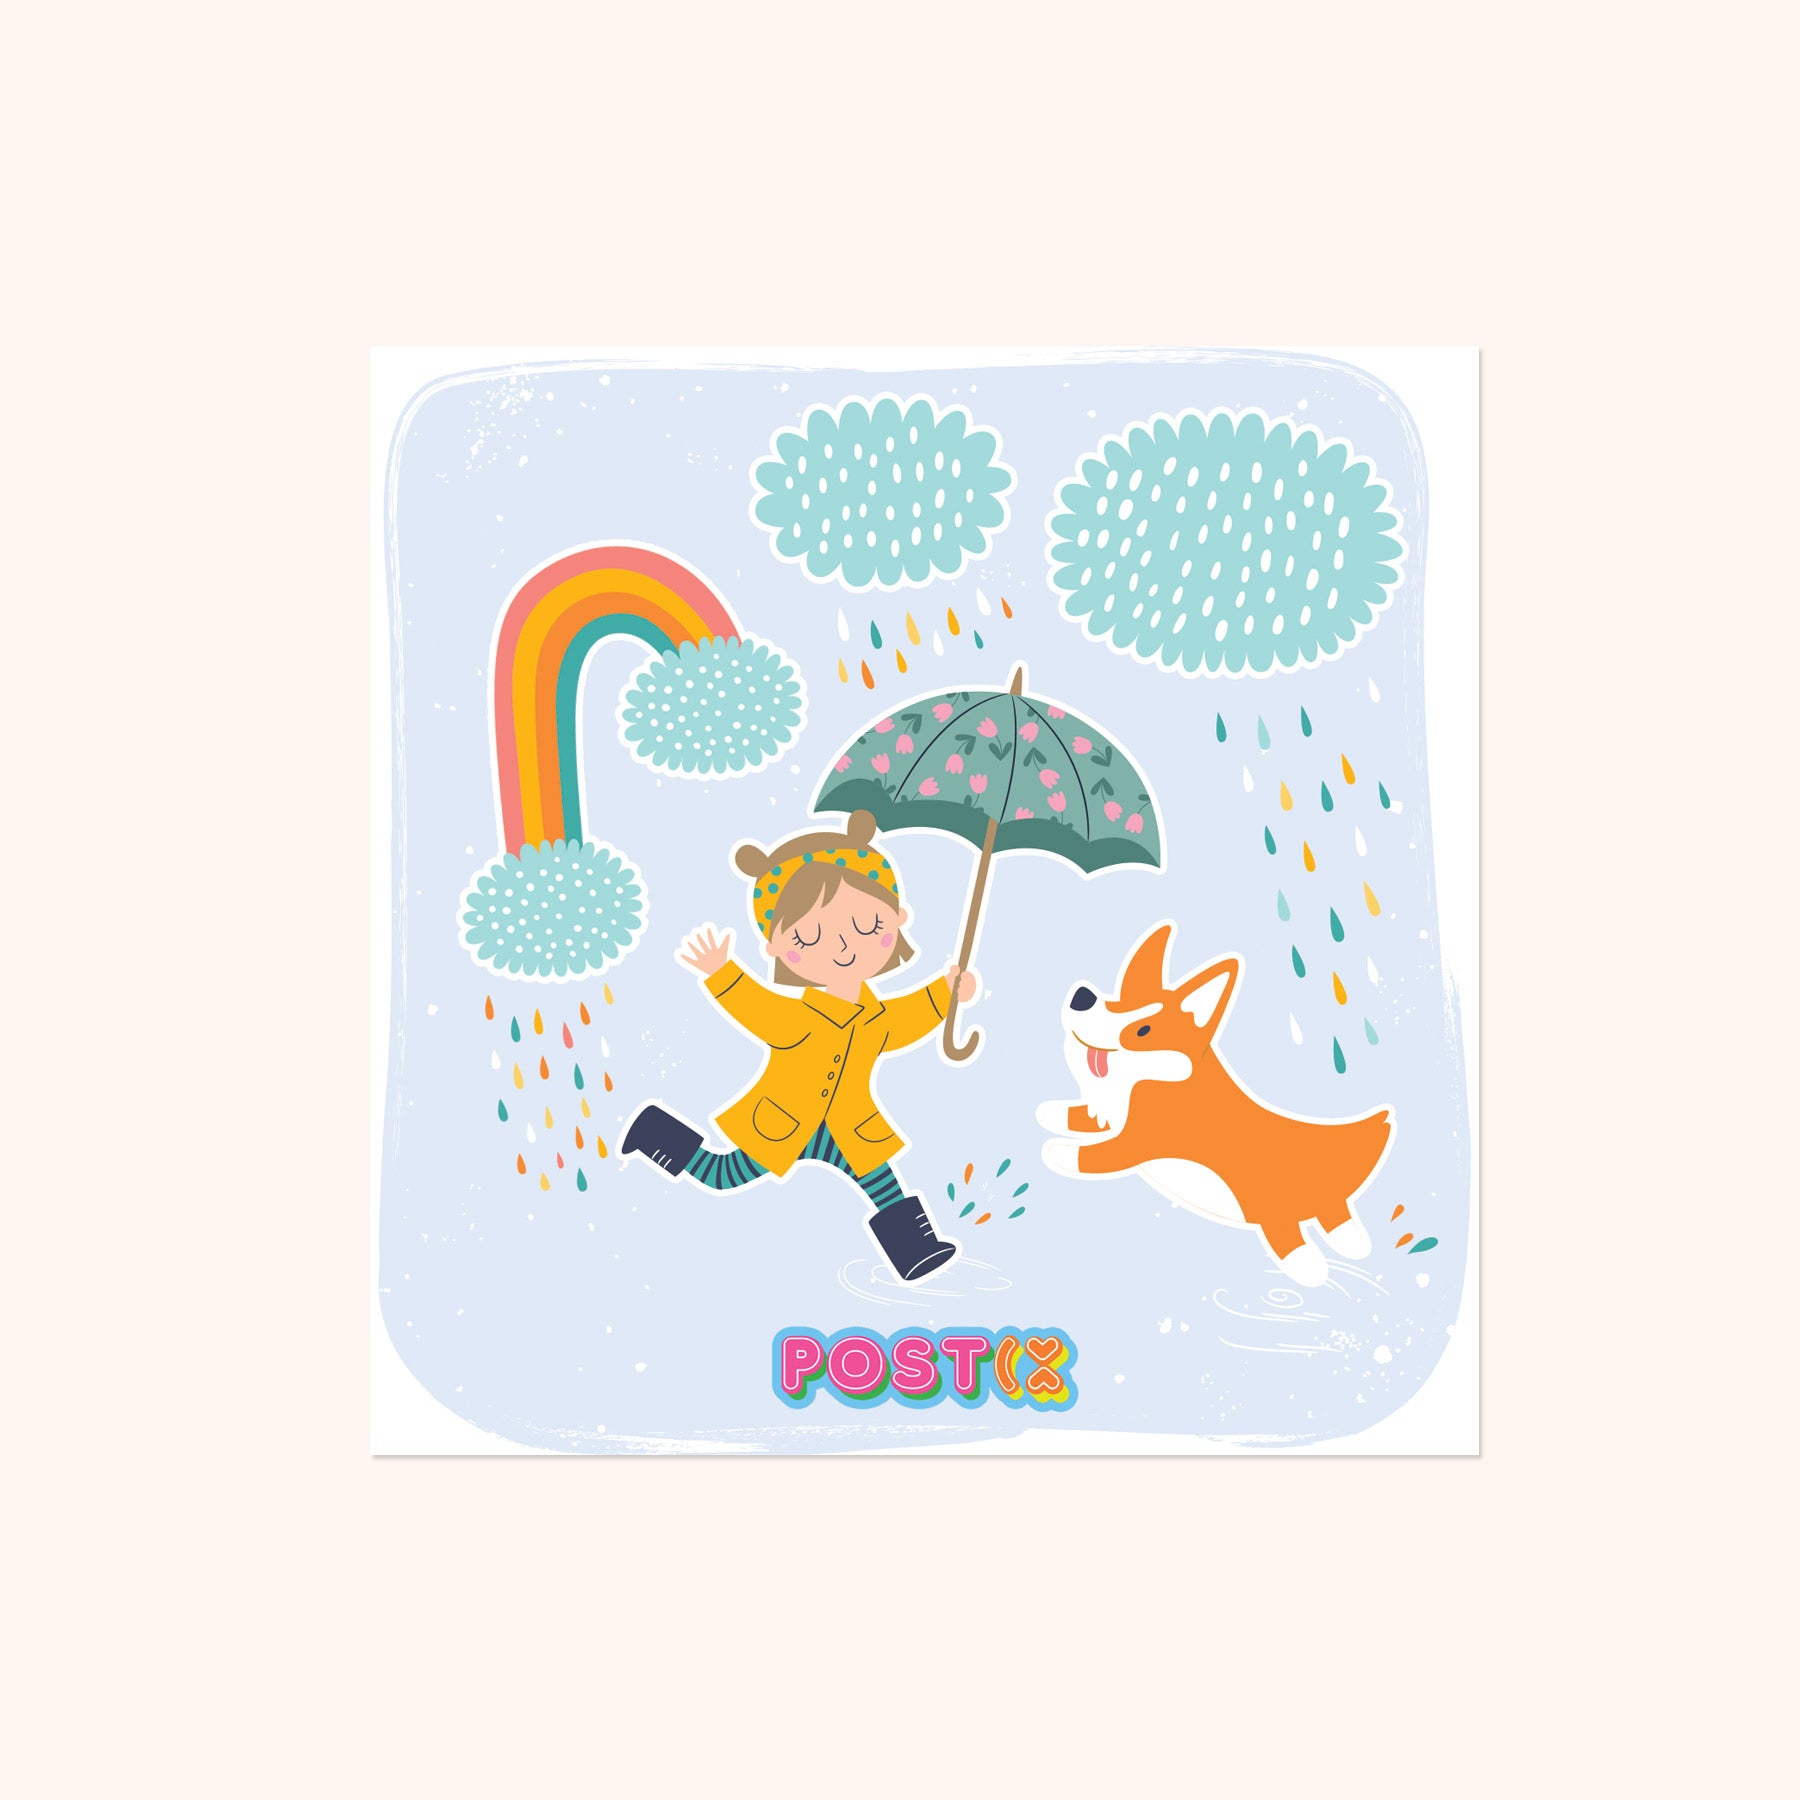 Playing in the Rain Square Sticker Sheet